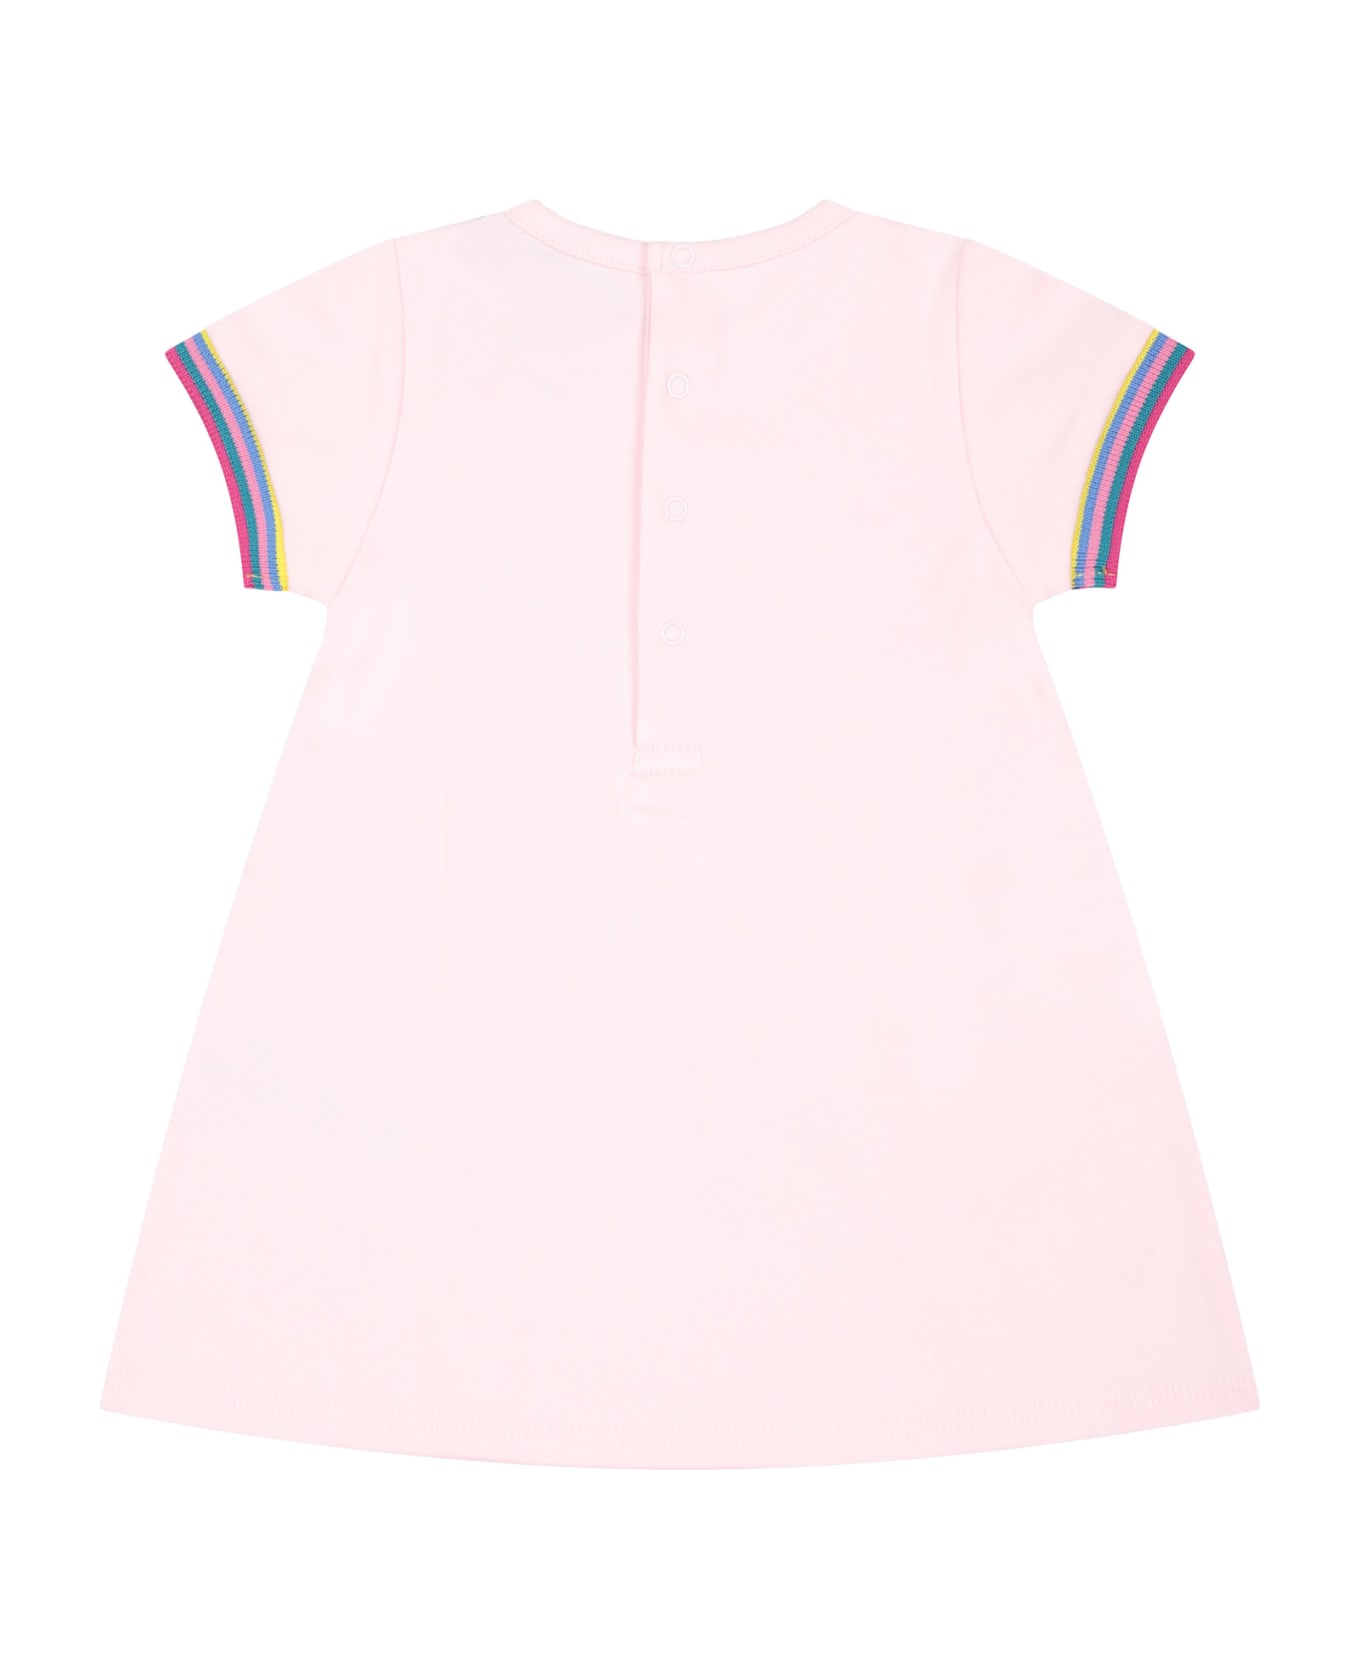 Marc Jacobs Pink Dress For Baby Girl With Bag Print And Logo - Pink ウェア